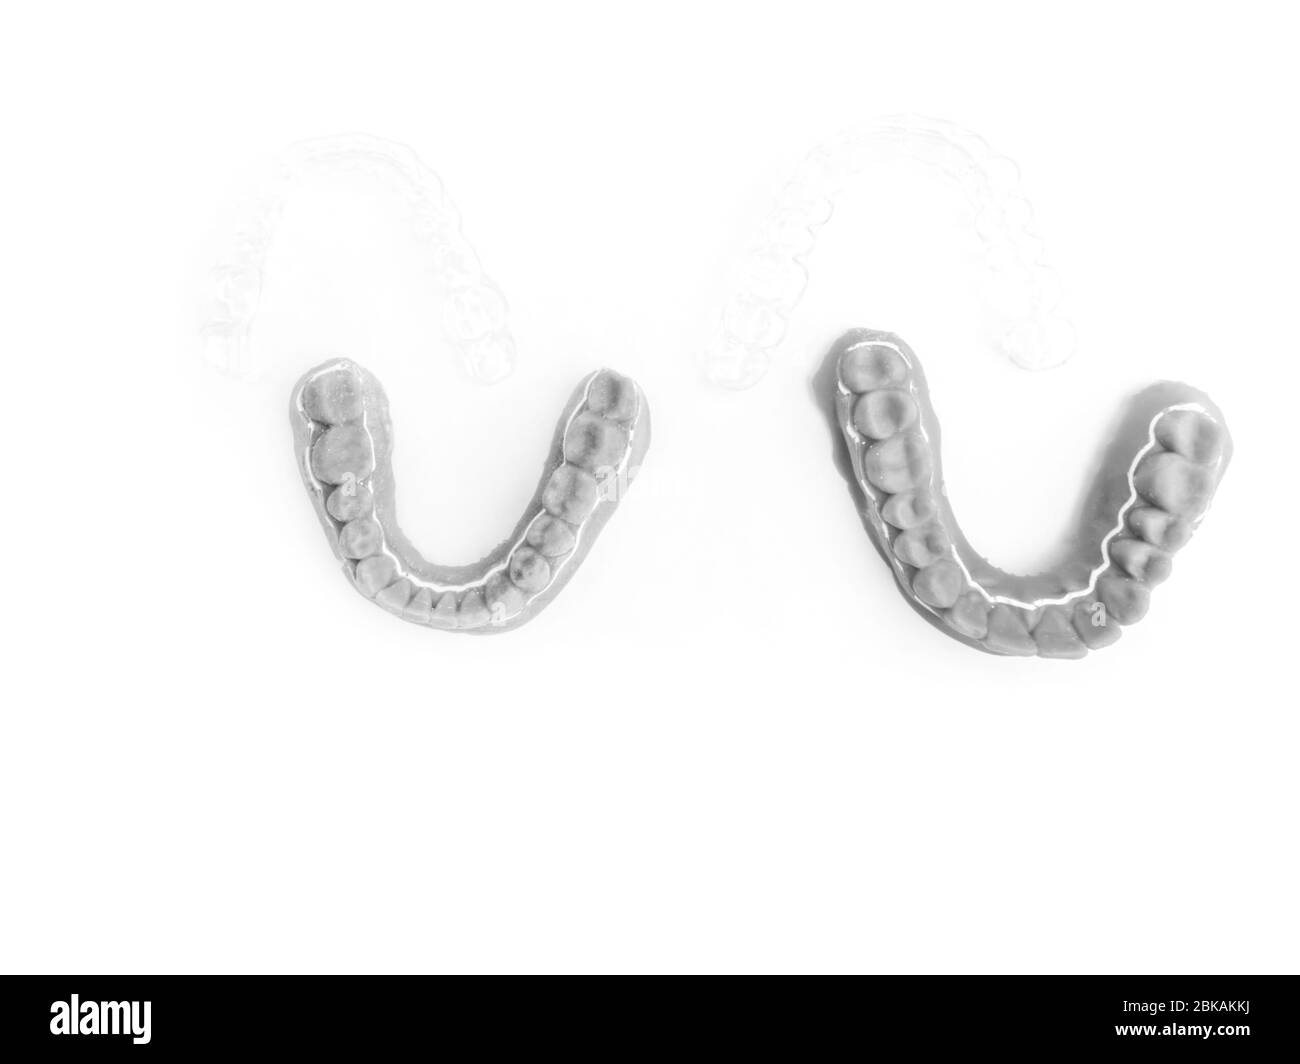 Gypsum model and transparent aligners, copy space Stock Photo